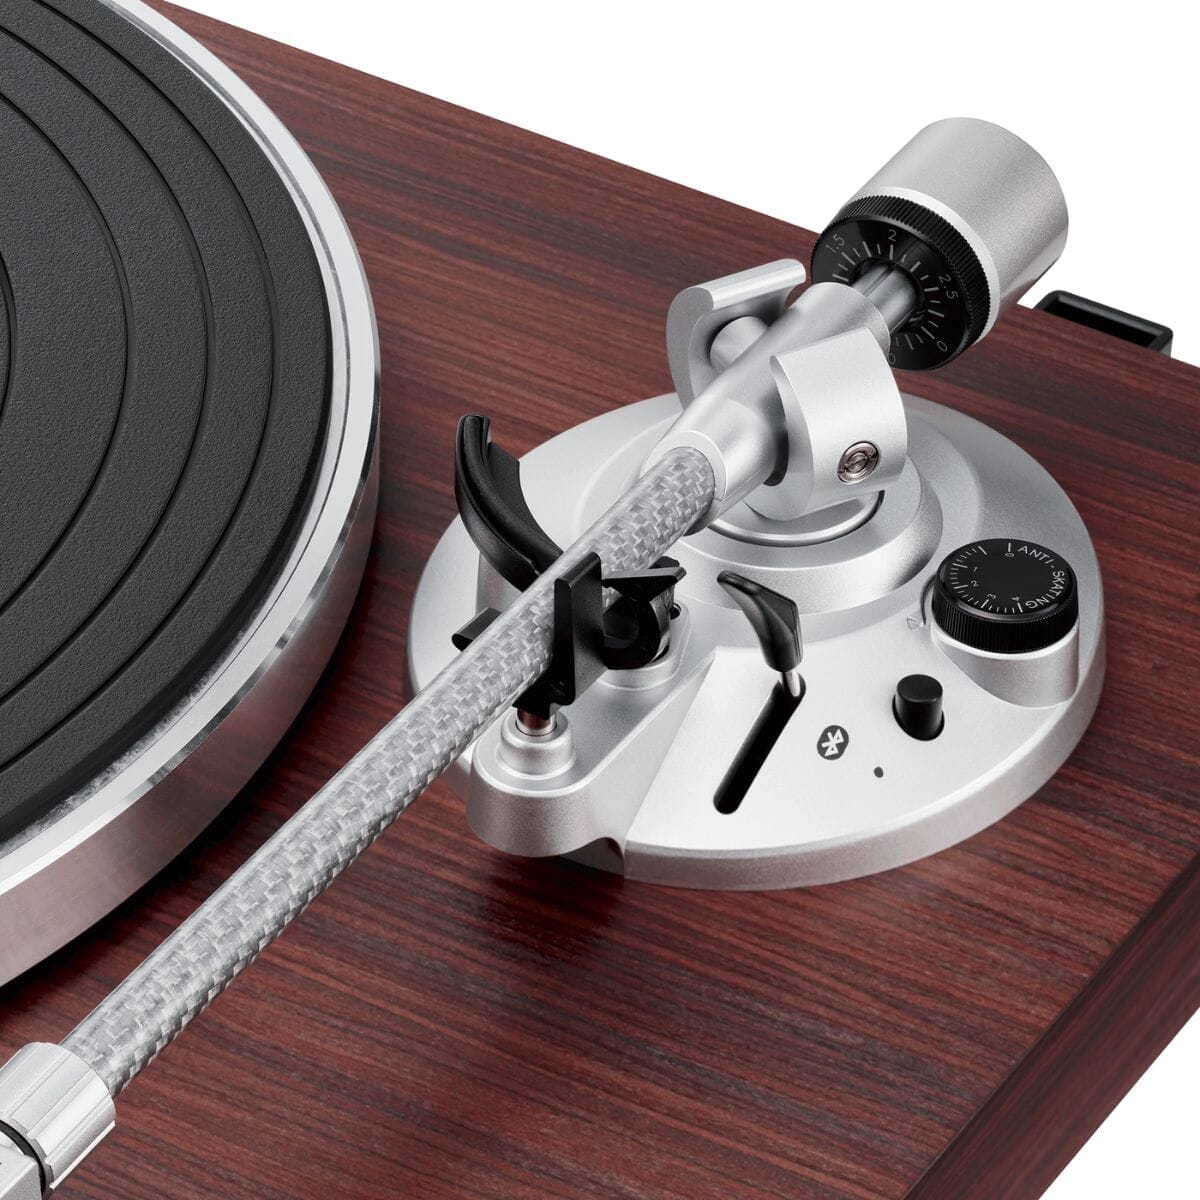 Audio-Technica AT-LPW50BT-RW Manual Belt Drive Turntable with Bluetooth Turntables Audio Technica 